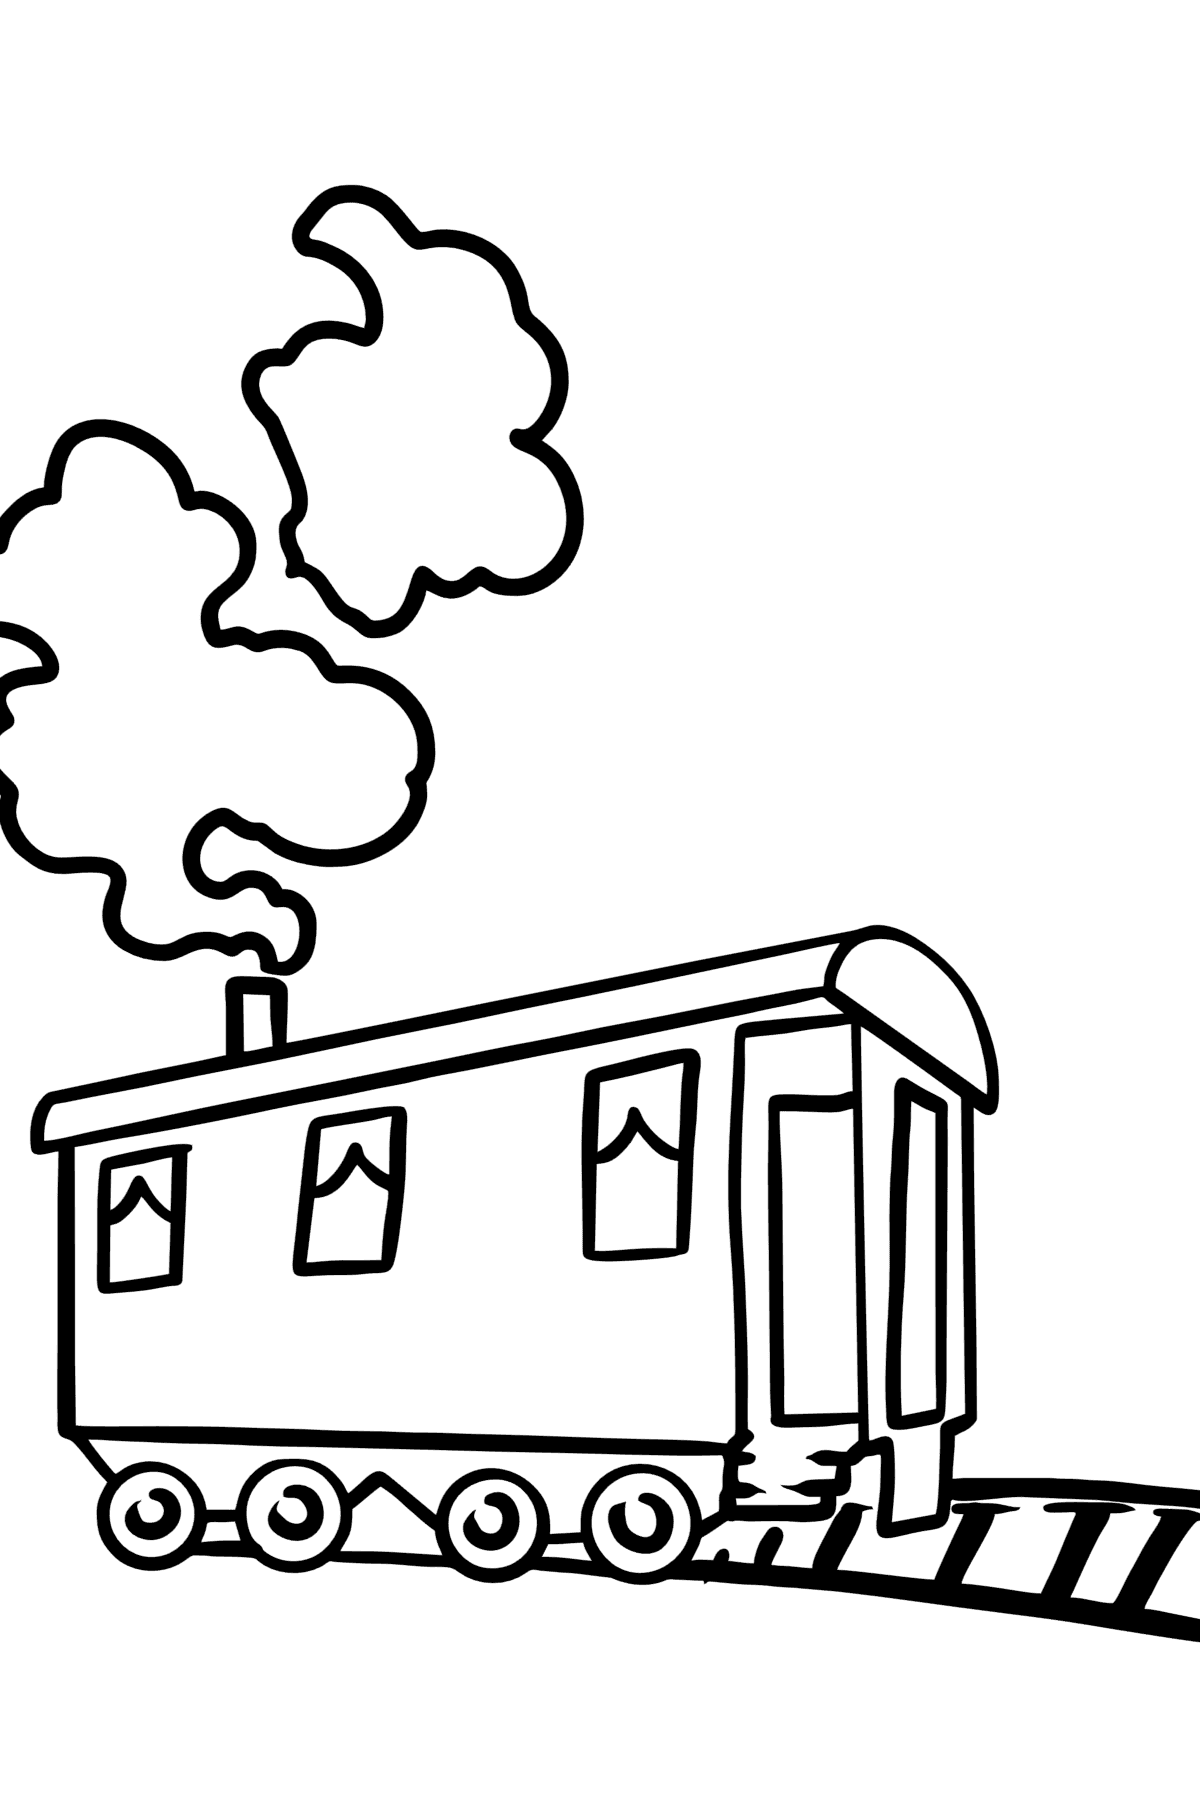 Railway coloring page - Coloring Pages for Kids